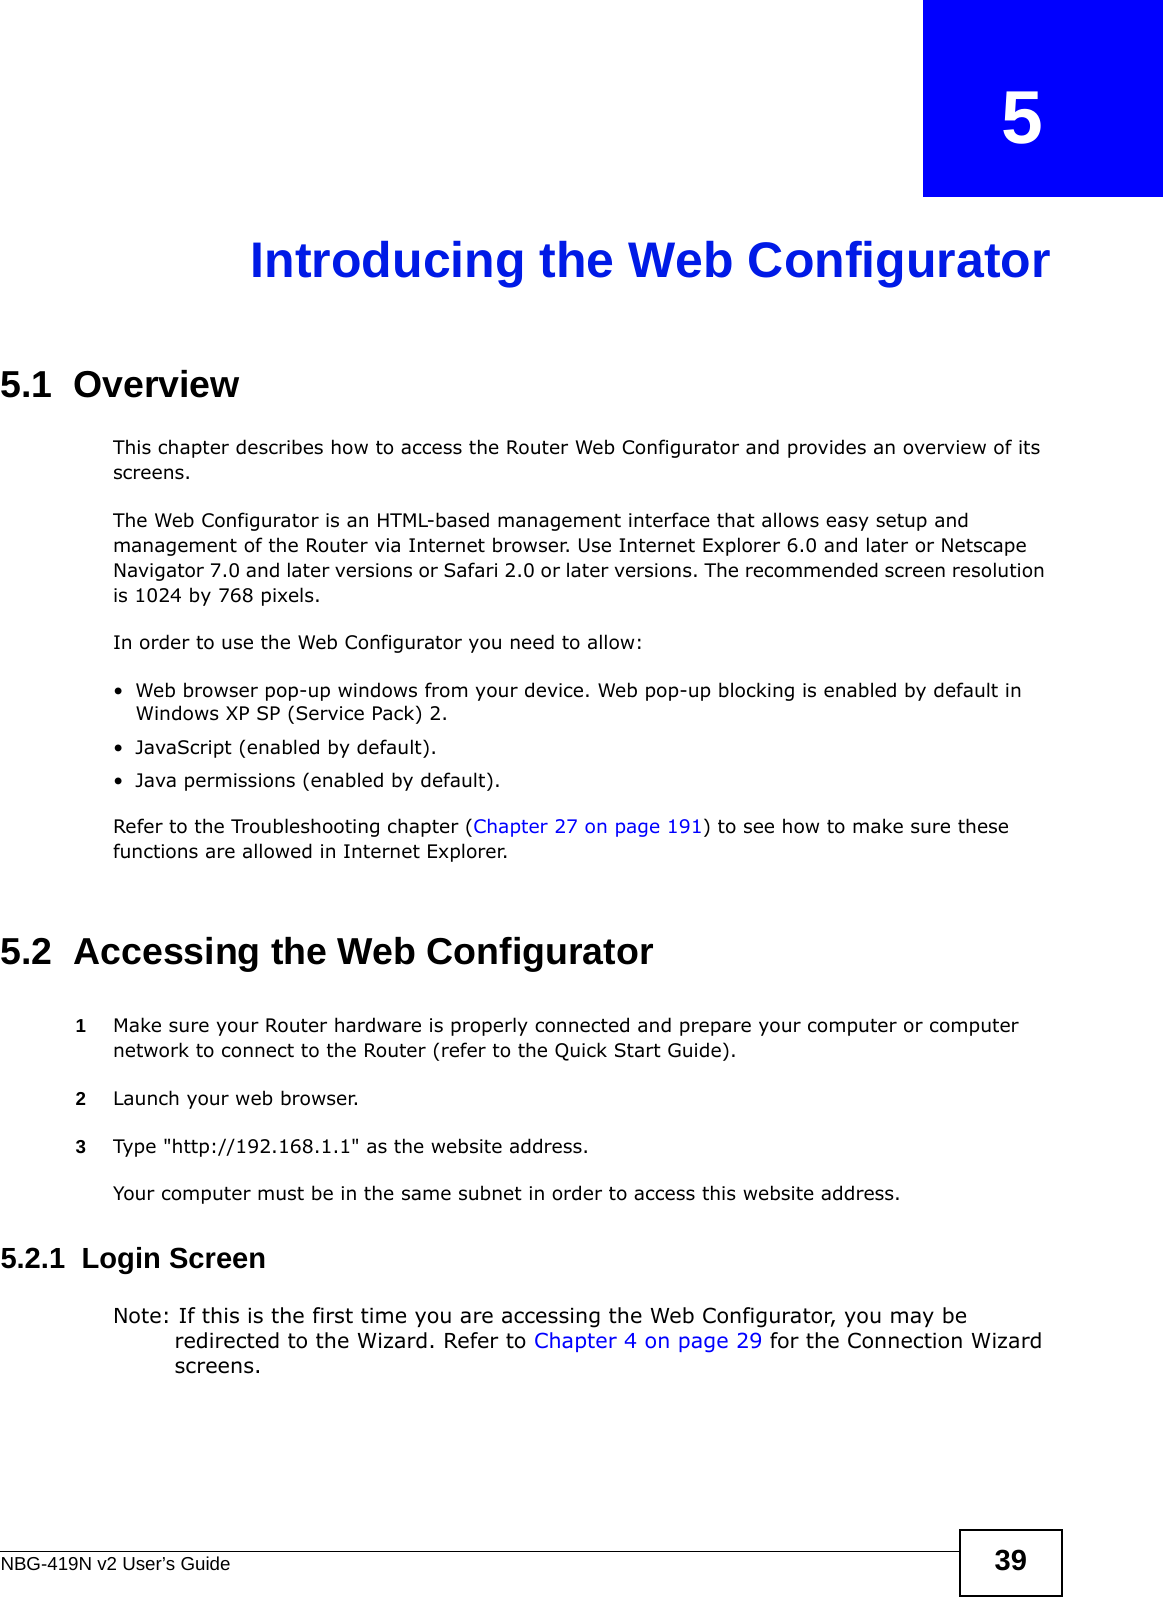 NBG-419N v2 User’s Guide 39CHAPTER   5Introducing the Web Configurator5.1  OverviewThis chapter describes how to access the Router Web Configurator and provides an overview of its screens.The Web Configurator is an HTML-based management interface that allows easy setup and management of the Router via Internet browser. Use Internet Explorer 6.0 and later or Netscape Navigator 7.0 and later versions or Safari 2.0 or later versions. The recommended screen resolution is 1024 by 768 pixels.In order to use the Web Configurator you need to allow:• Web browser pop-up windows from your device. Web pop-up blocking is enabled by default in Windows XP SP (Service Pack) 2.• JavaScript (enabled by default).• Java permissions (enabled by default).Refer to the Troubleshooting chapter (Chapter 27 on page 191) to see how to make sure these functions are allowed in Internet Explorer.5.2  Accessing the Web Configurator1Make sure your Router hardware is properly connected and prepare your computer or computer network to connect to the Router (refer to the Quick Start Guide).2Launch your web browser.3Type &quot;http://192.168.1.1&quot; as the website address. Your computer must be in the same subnet in order to access this website address.5.2.1  Login ScreenNote: If this is the first time you are accessing the Web Configurator, you may be redirected to the Wizard. Refer to Chapter 4 on page 29 for the Connection Wizard screens. 